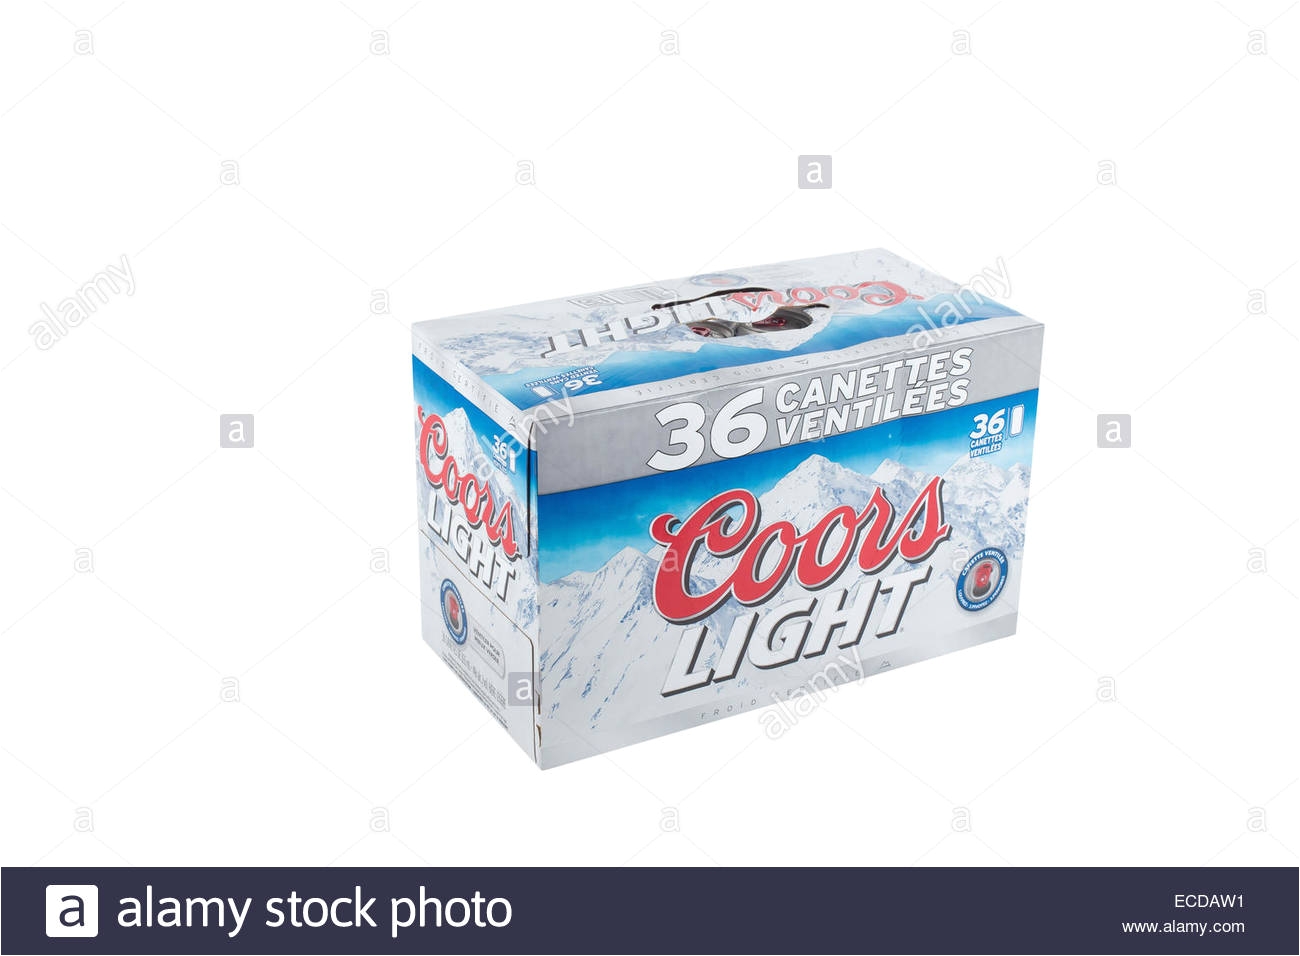 a pack of 36 355ml cans of coors light beer is pictured over a pure white